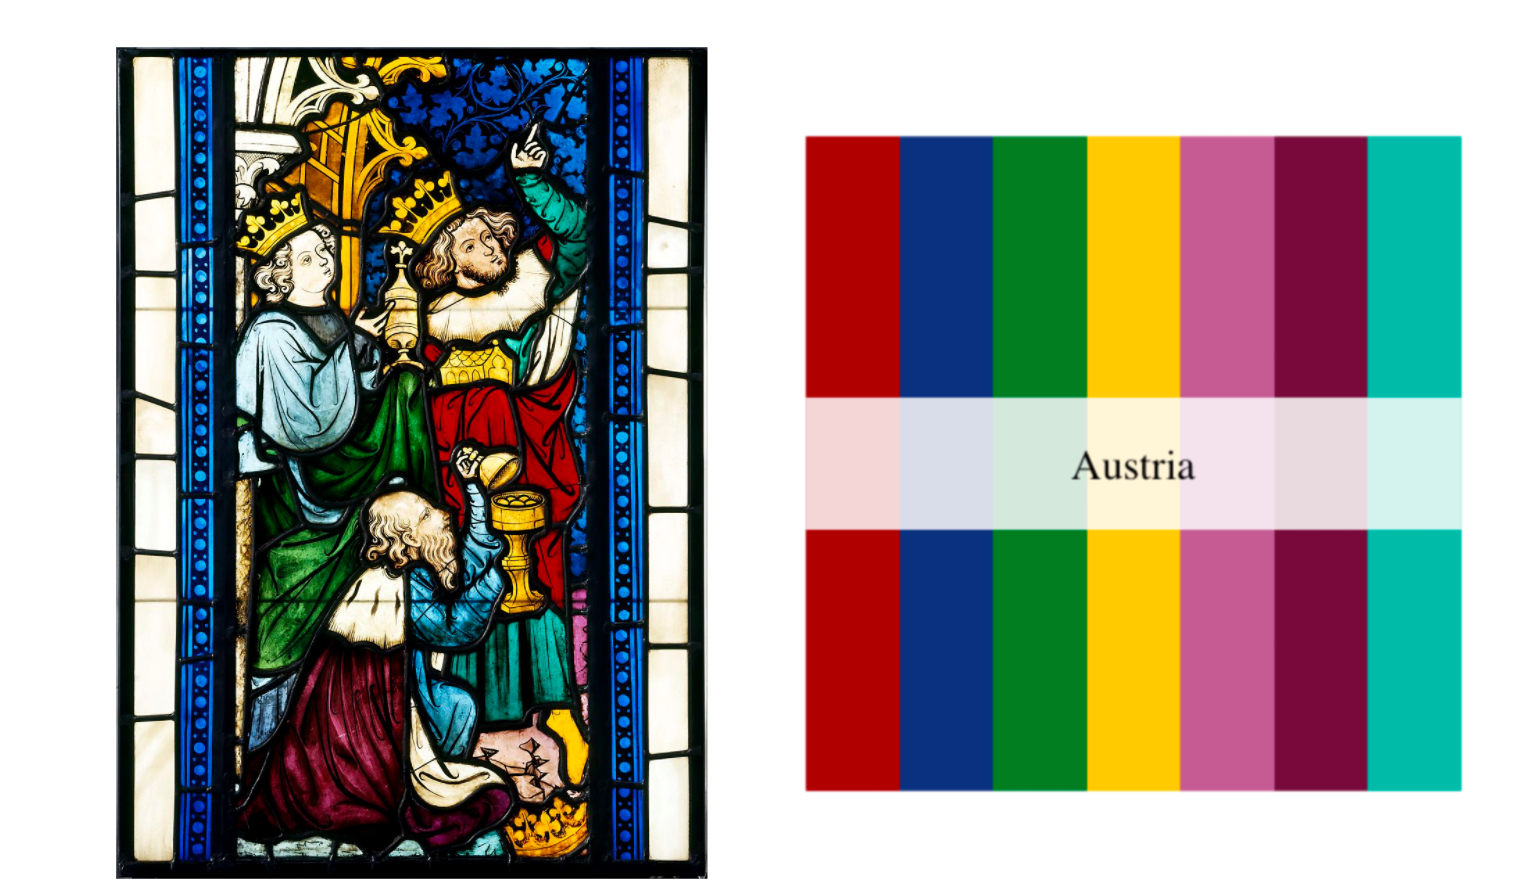 The Palettes inspired by works at the Metropolitan Museum of Art in New York, this image shows how the 1st Palette was derived from the Adoration of the Magi from Seven Scenes from the Life of Christ, 1390, Artists Unknown, Austrian